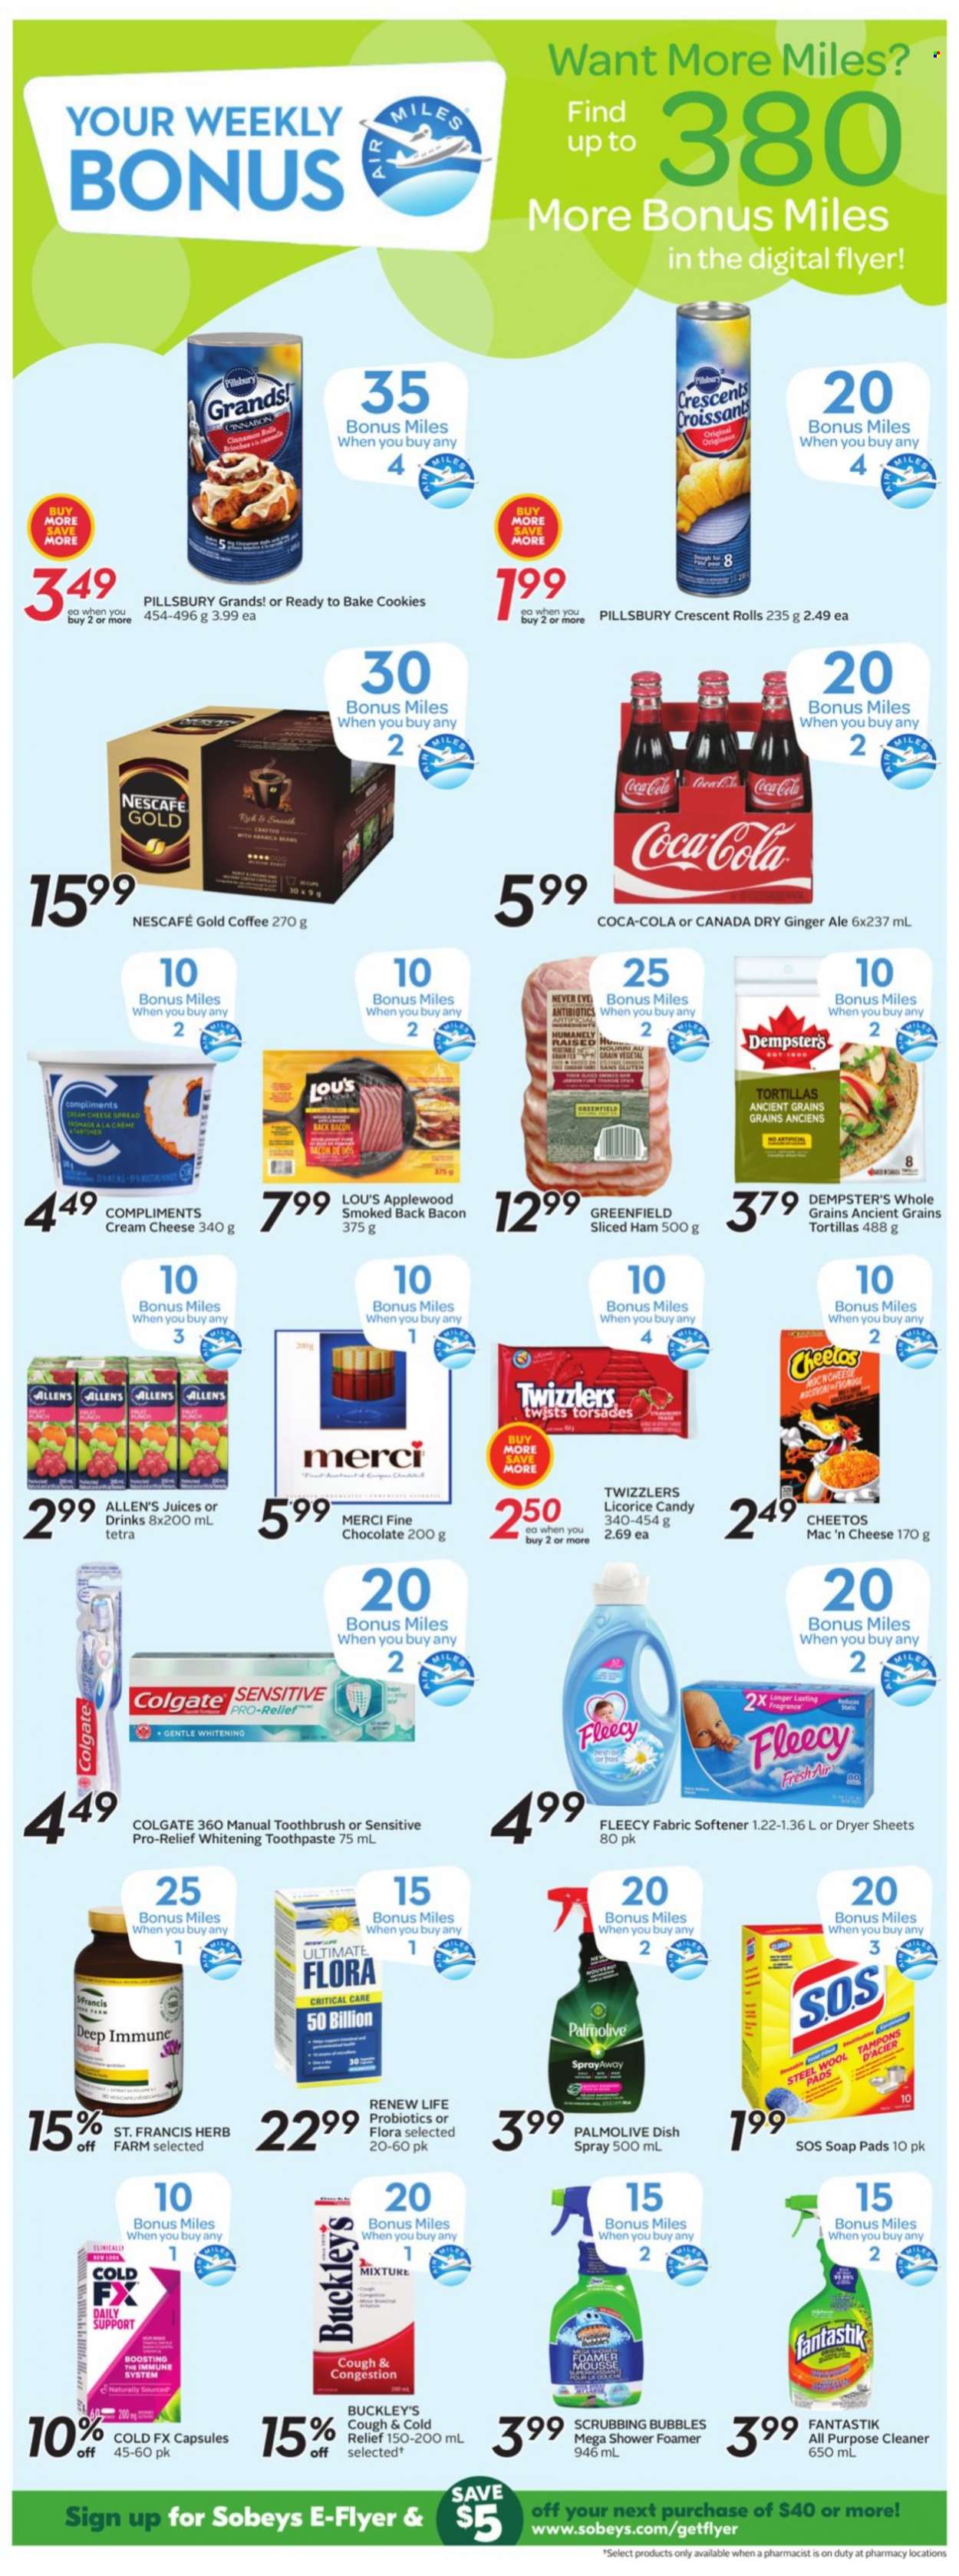 thumbnail - Sobeys Flyer - September 23, 2021 - September 29, 2021 - Sales products - tortillas, croissant, crescent rolls, Pillsbury, bacon, ham, cream cheese, cheese, Flora, cookies, chocolate, Merci, Cheetos, herbs, Canada Dry, Coca-Cola, ginger ale, juice, coffee, Scrubbing Bubbles, cleaner, all purpose cleaner, fabric softener, dryer sheets, Palmolive, soap, toothbrush, toothpaste, probiotics, Colgate, Nescafé. Page 13.